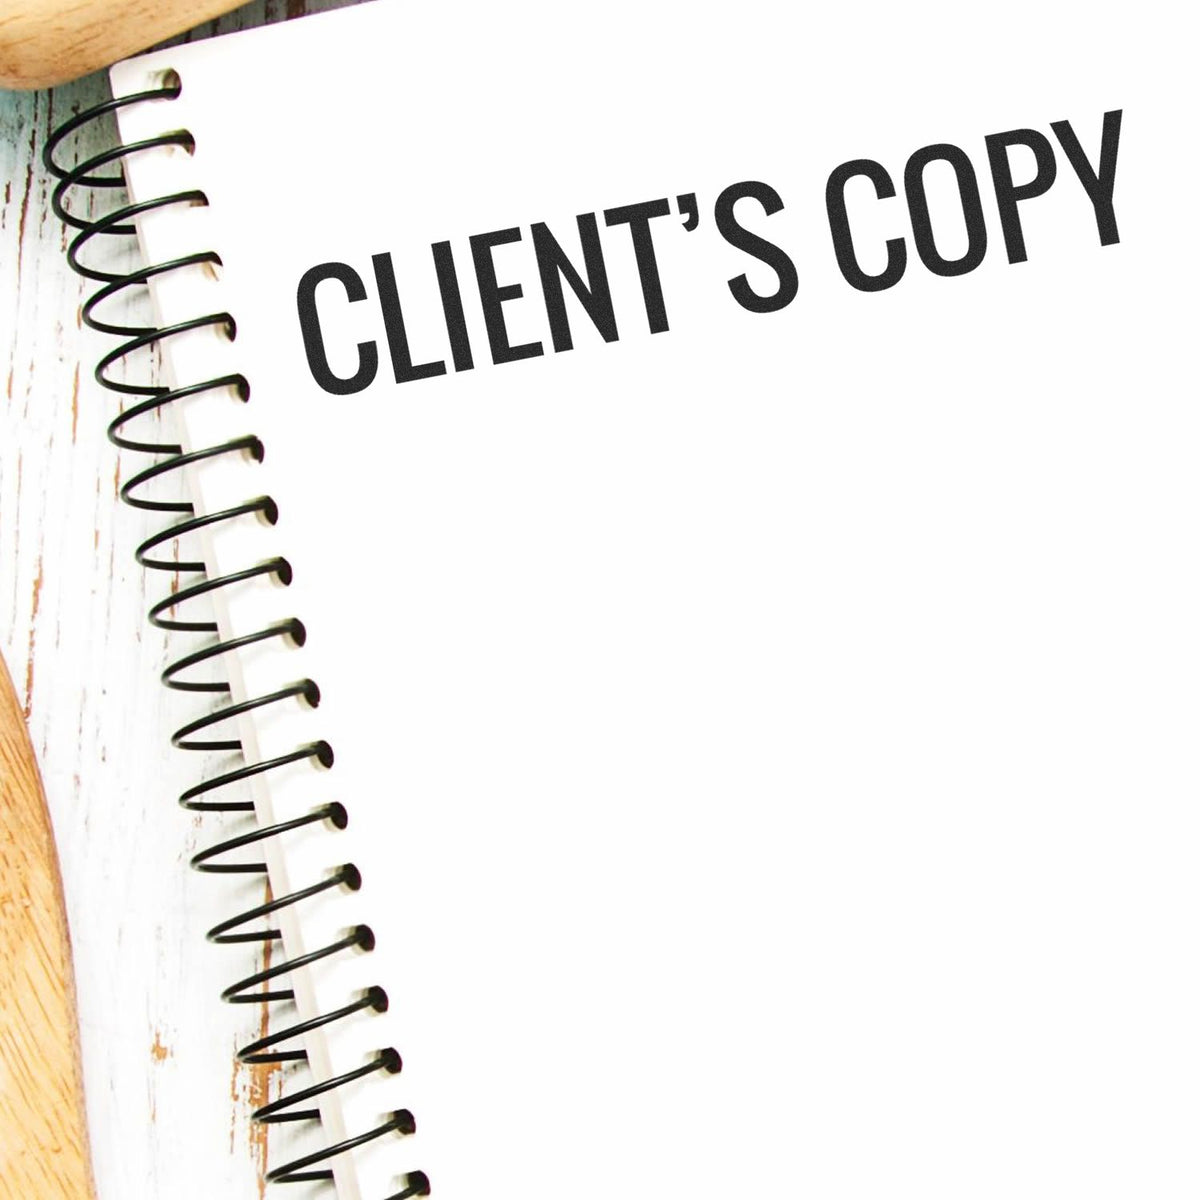 Large Self-Inking Client&#39;s Copy Stamp Lifestyle Photo